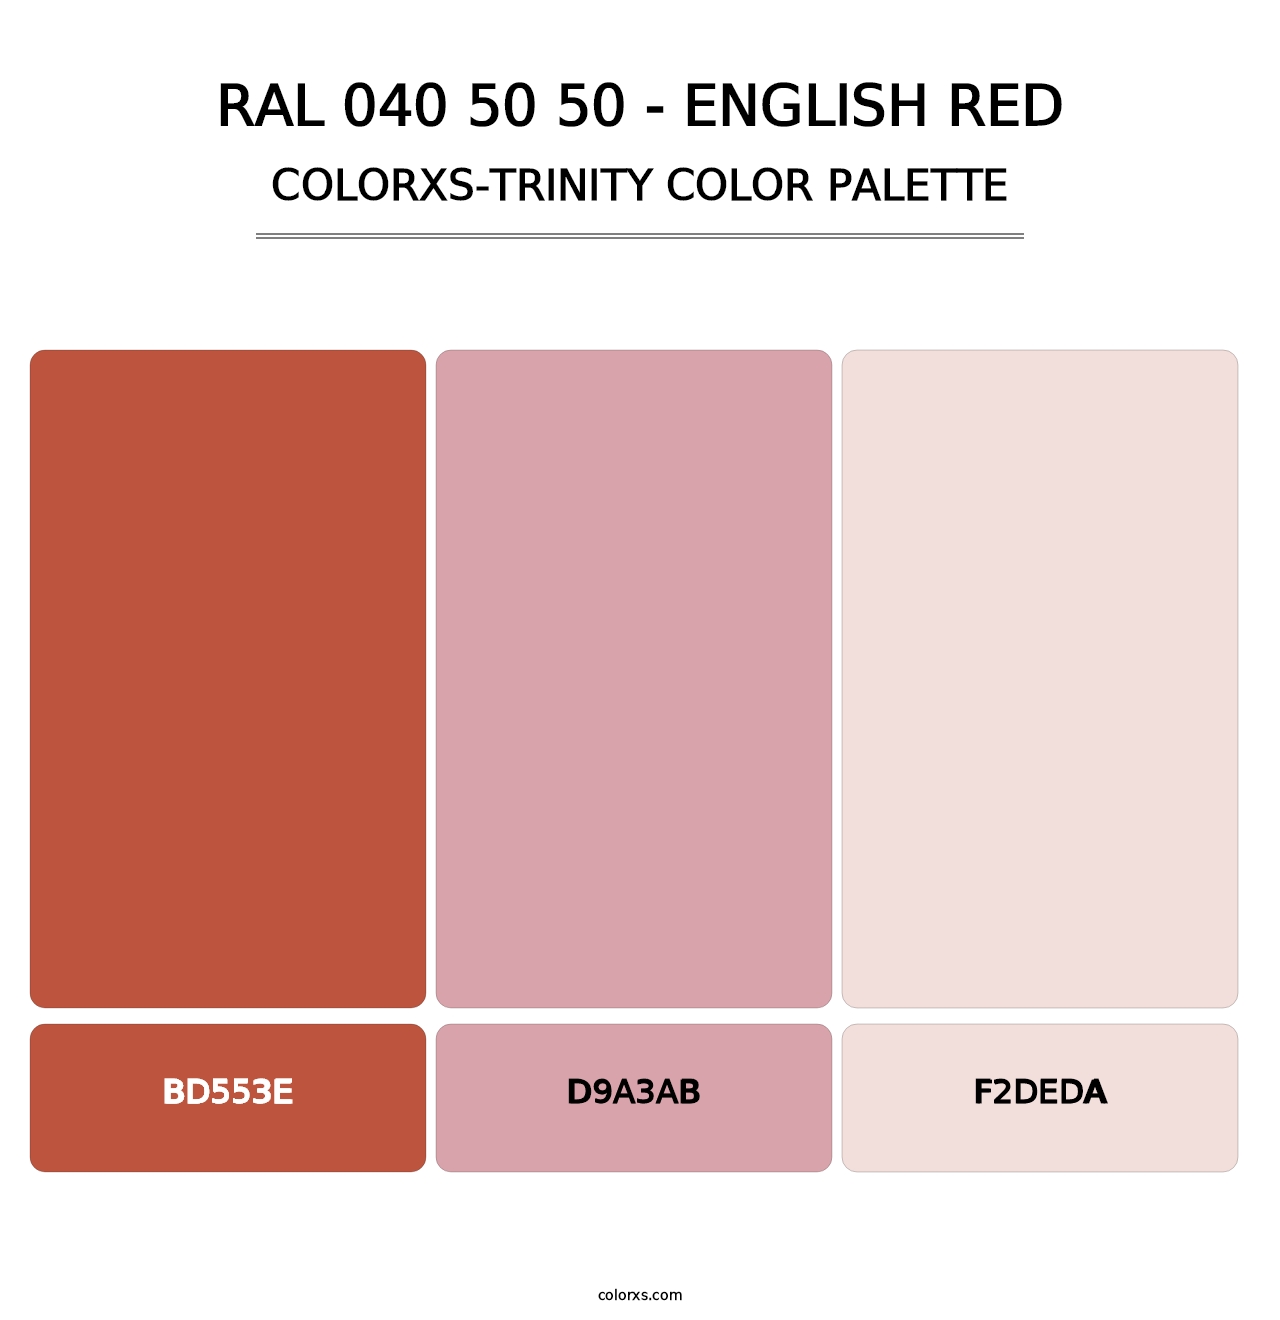 RAL 040 50 50 - English Red - Colorxs Trinity Palette